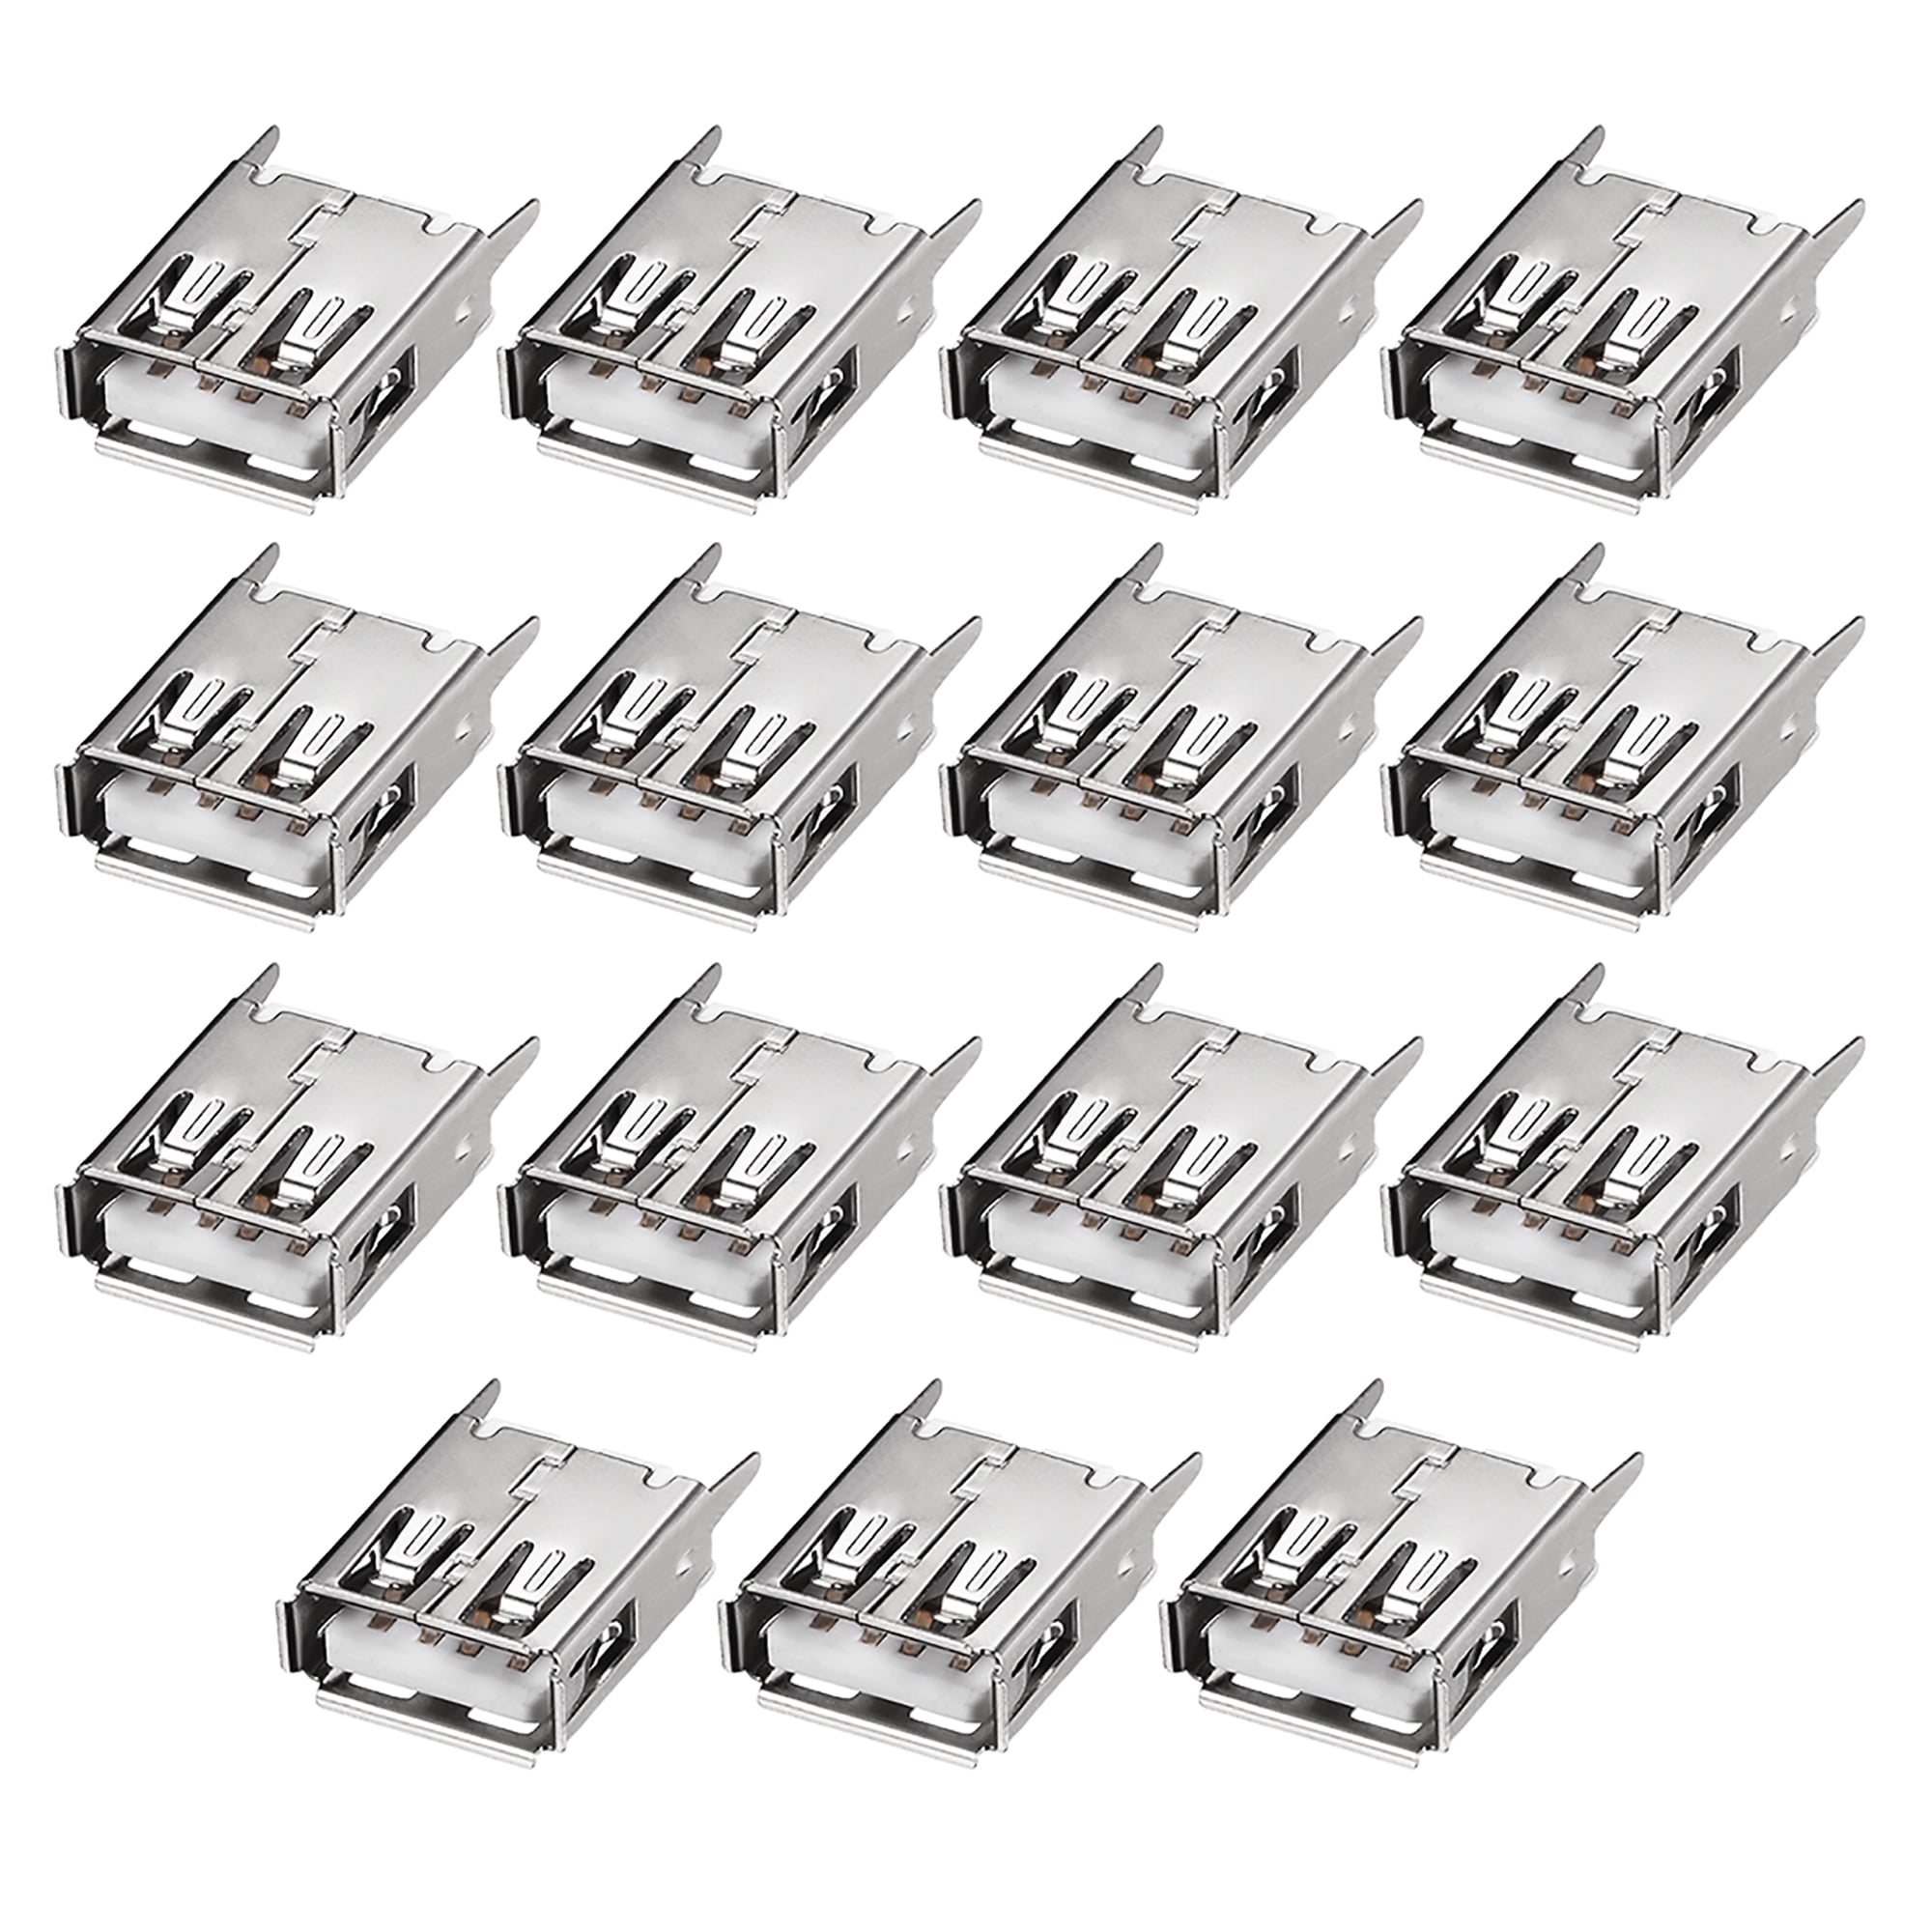 20 PCS USB Connector Type A 4 Pin Receptacle Female Vertical Mount Socket 